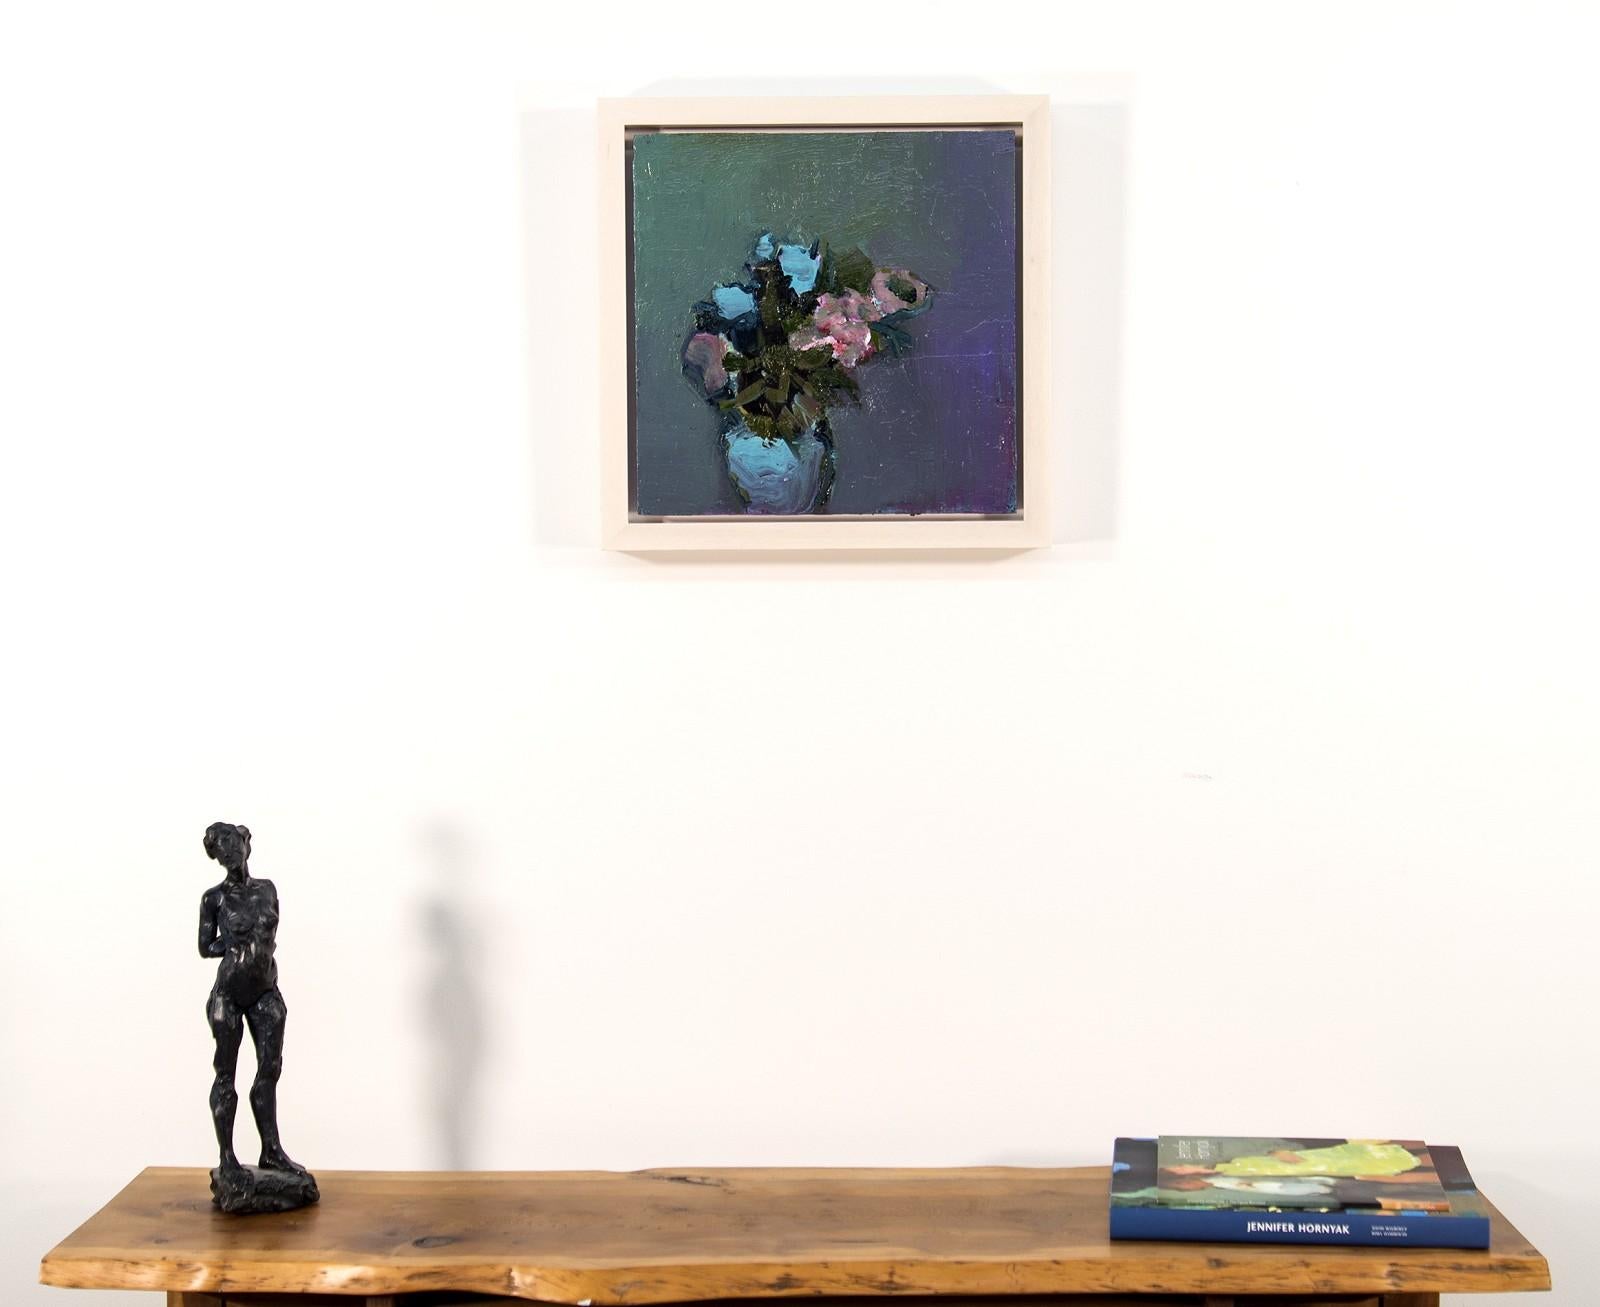 Blue Pimpernel - small, floral, intimate, figurative, still life oil on canvas 1